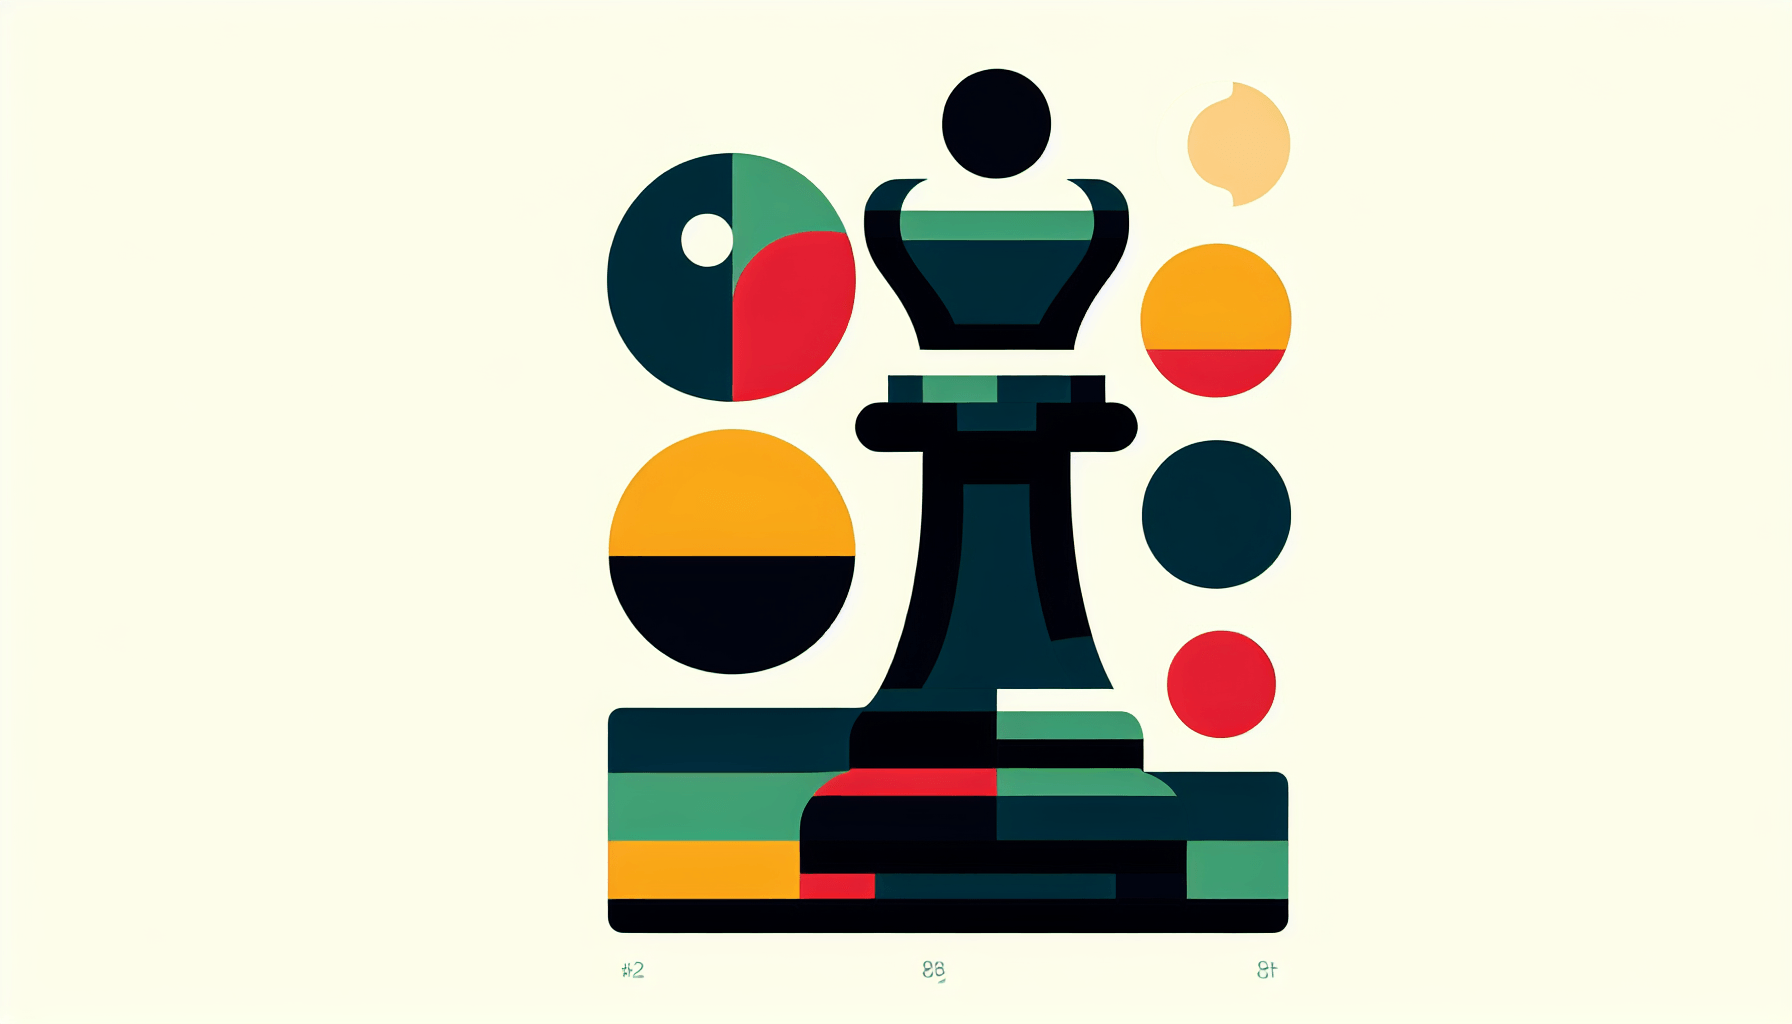 Chess piece in flat illustration style and white background, red #f47574, green #88c7a8, yellow #fcc44b, and blue #645bc8 colors.